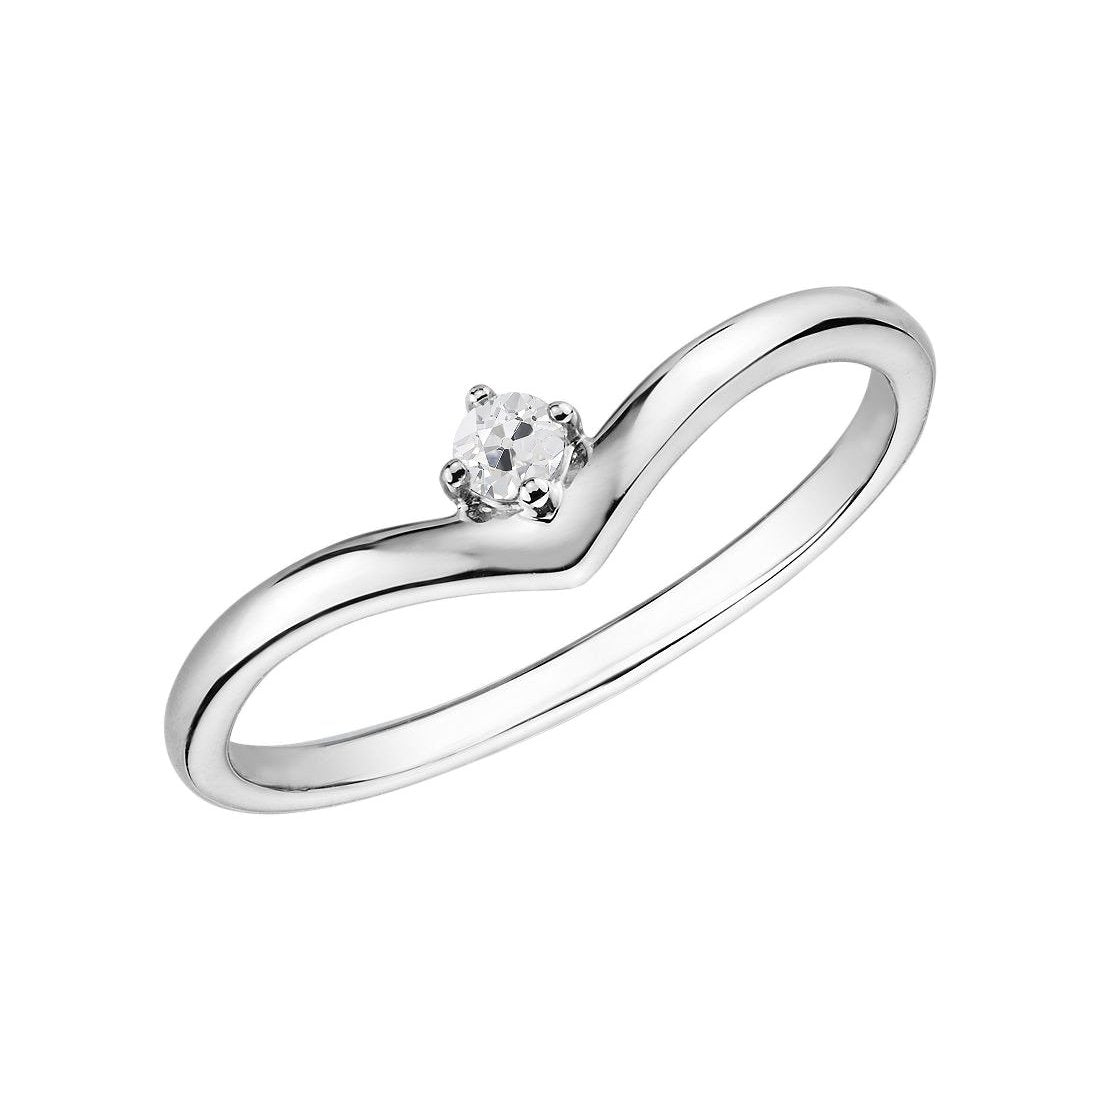 0.50 carati Solitaire Promise Ring Old Mine Cut Round Diamond 4 Prong - harrychadent.it